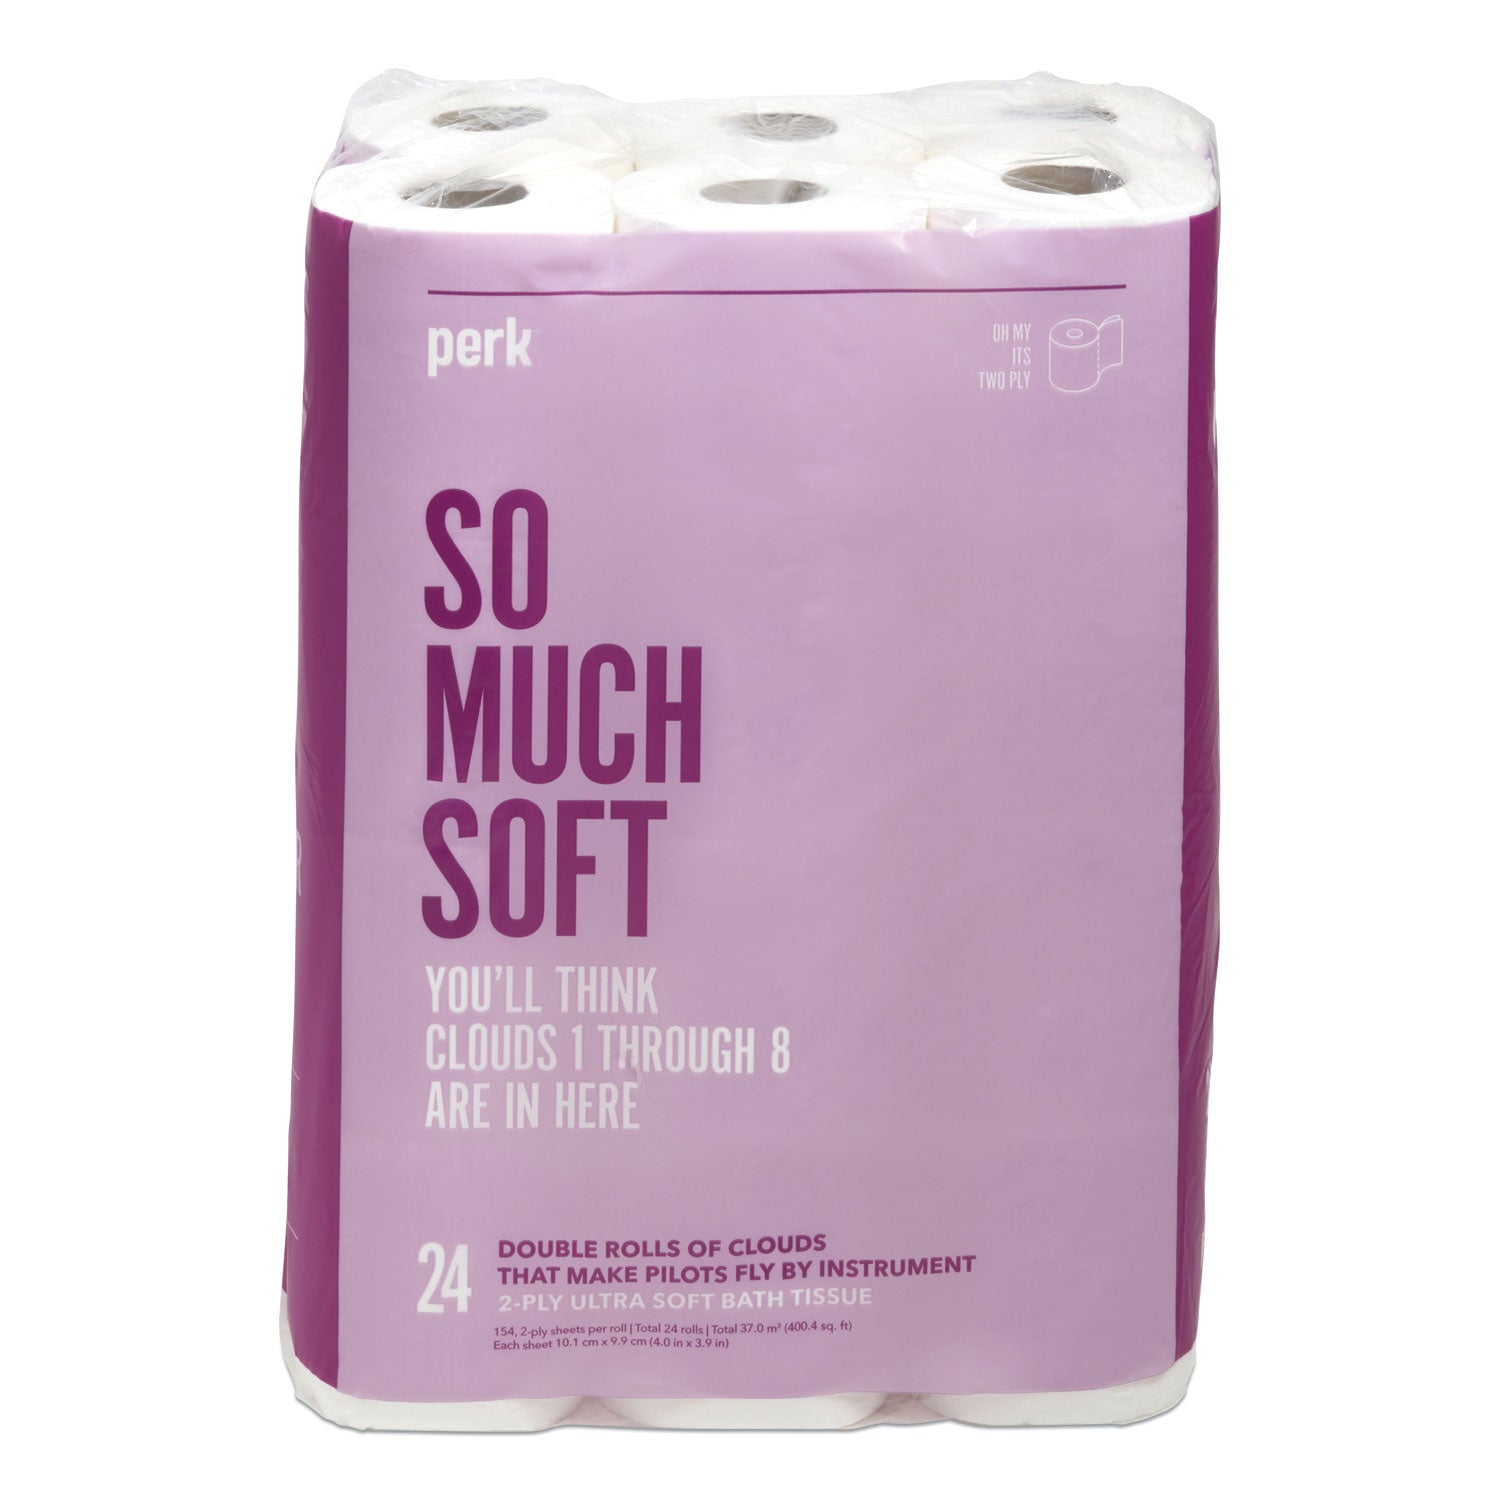 ultra-soft-2-ply-standard-toilet-paper-septic-safe-white-154-sheets-roll-24-rolls-pack_prk24380328 - 2